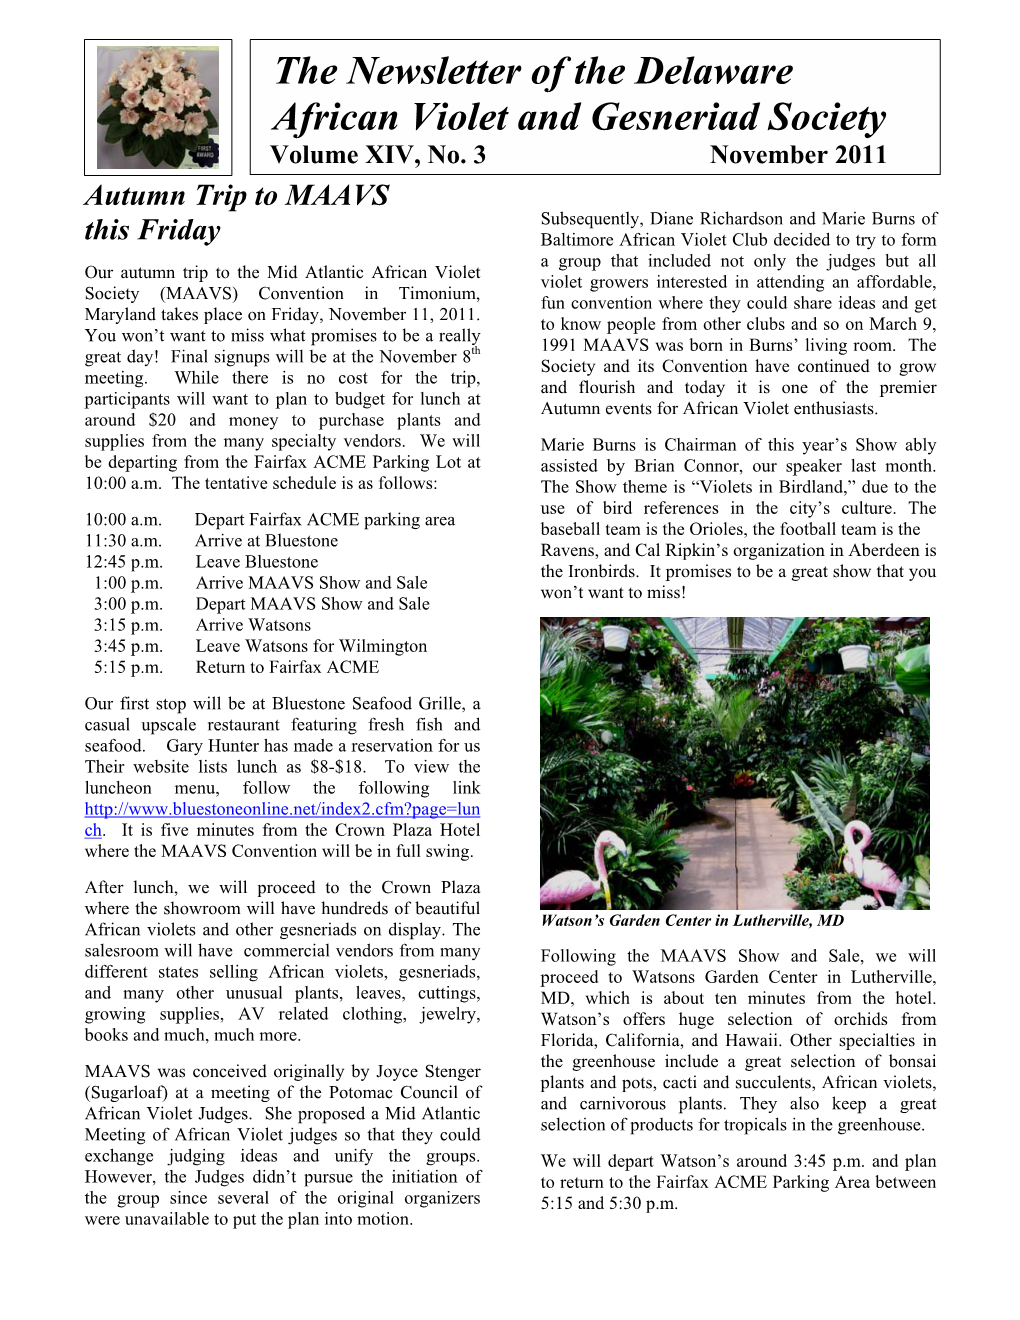 The Newsletter of the Delaware African Violet and Gesneriad Society